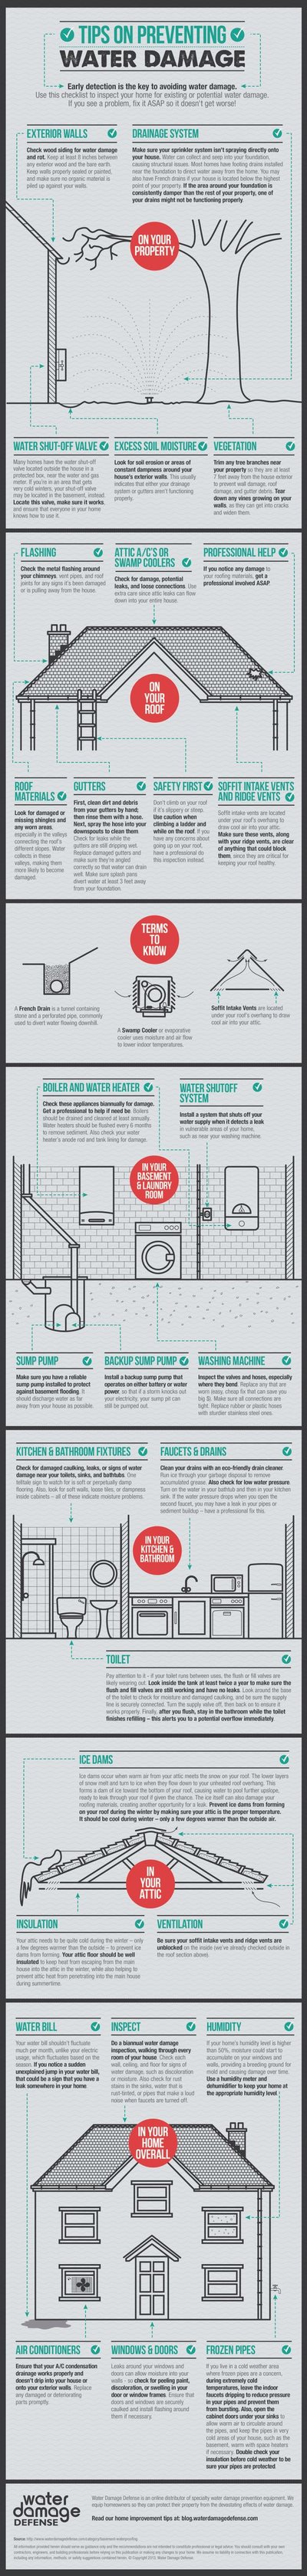 preventing_water_damage_infographic.jpg